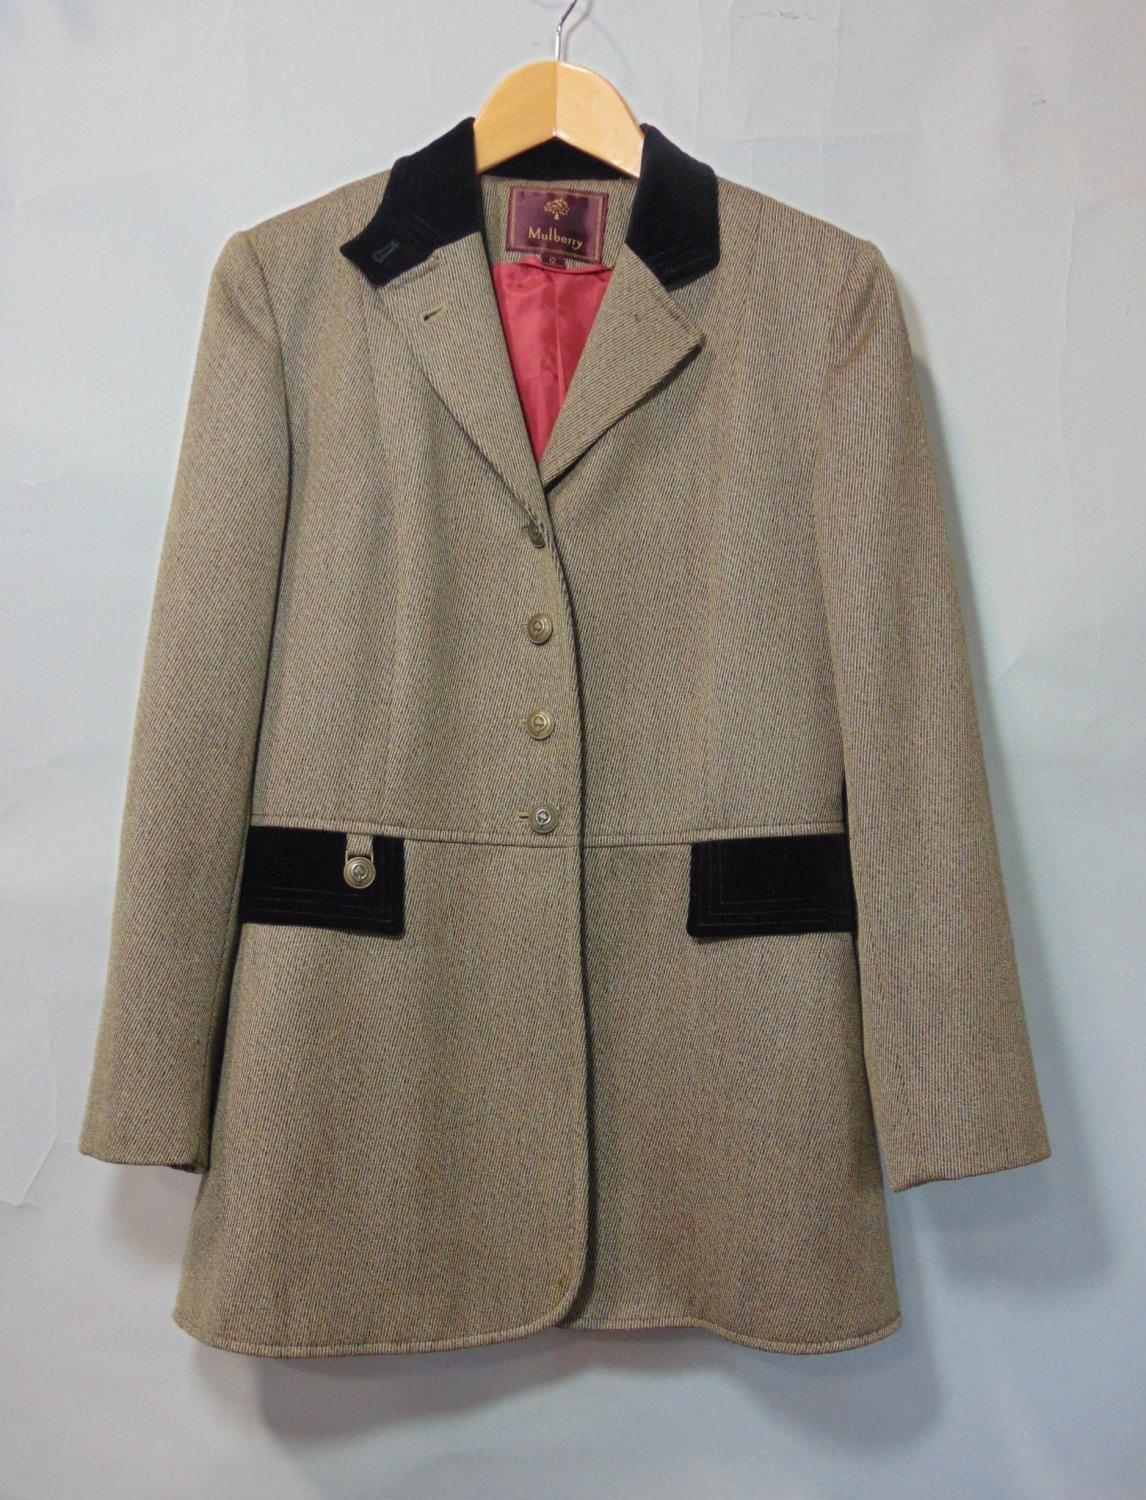 Ladies Mulberry fitted jacket in tweed, trimmed with black velvet, with wine coloured lining, size